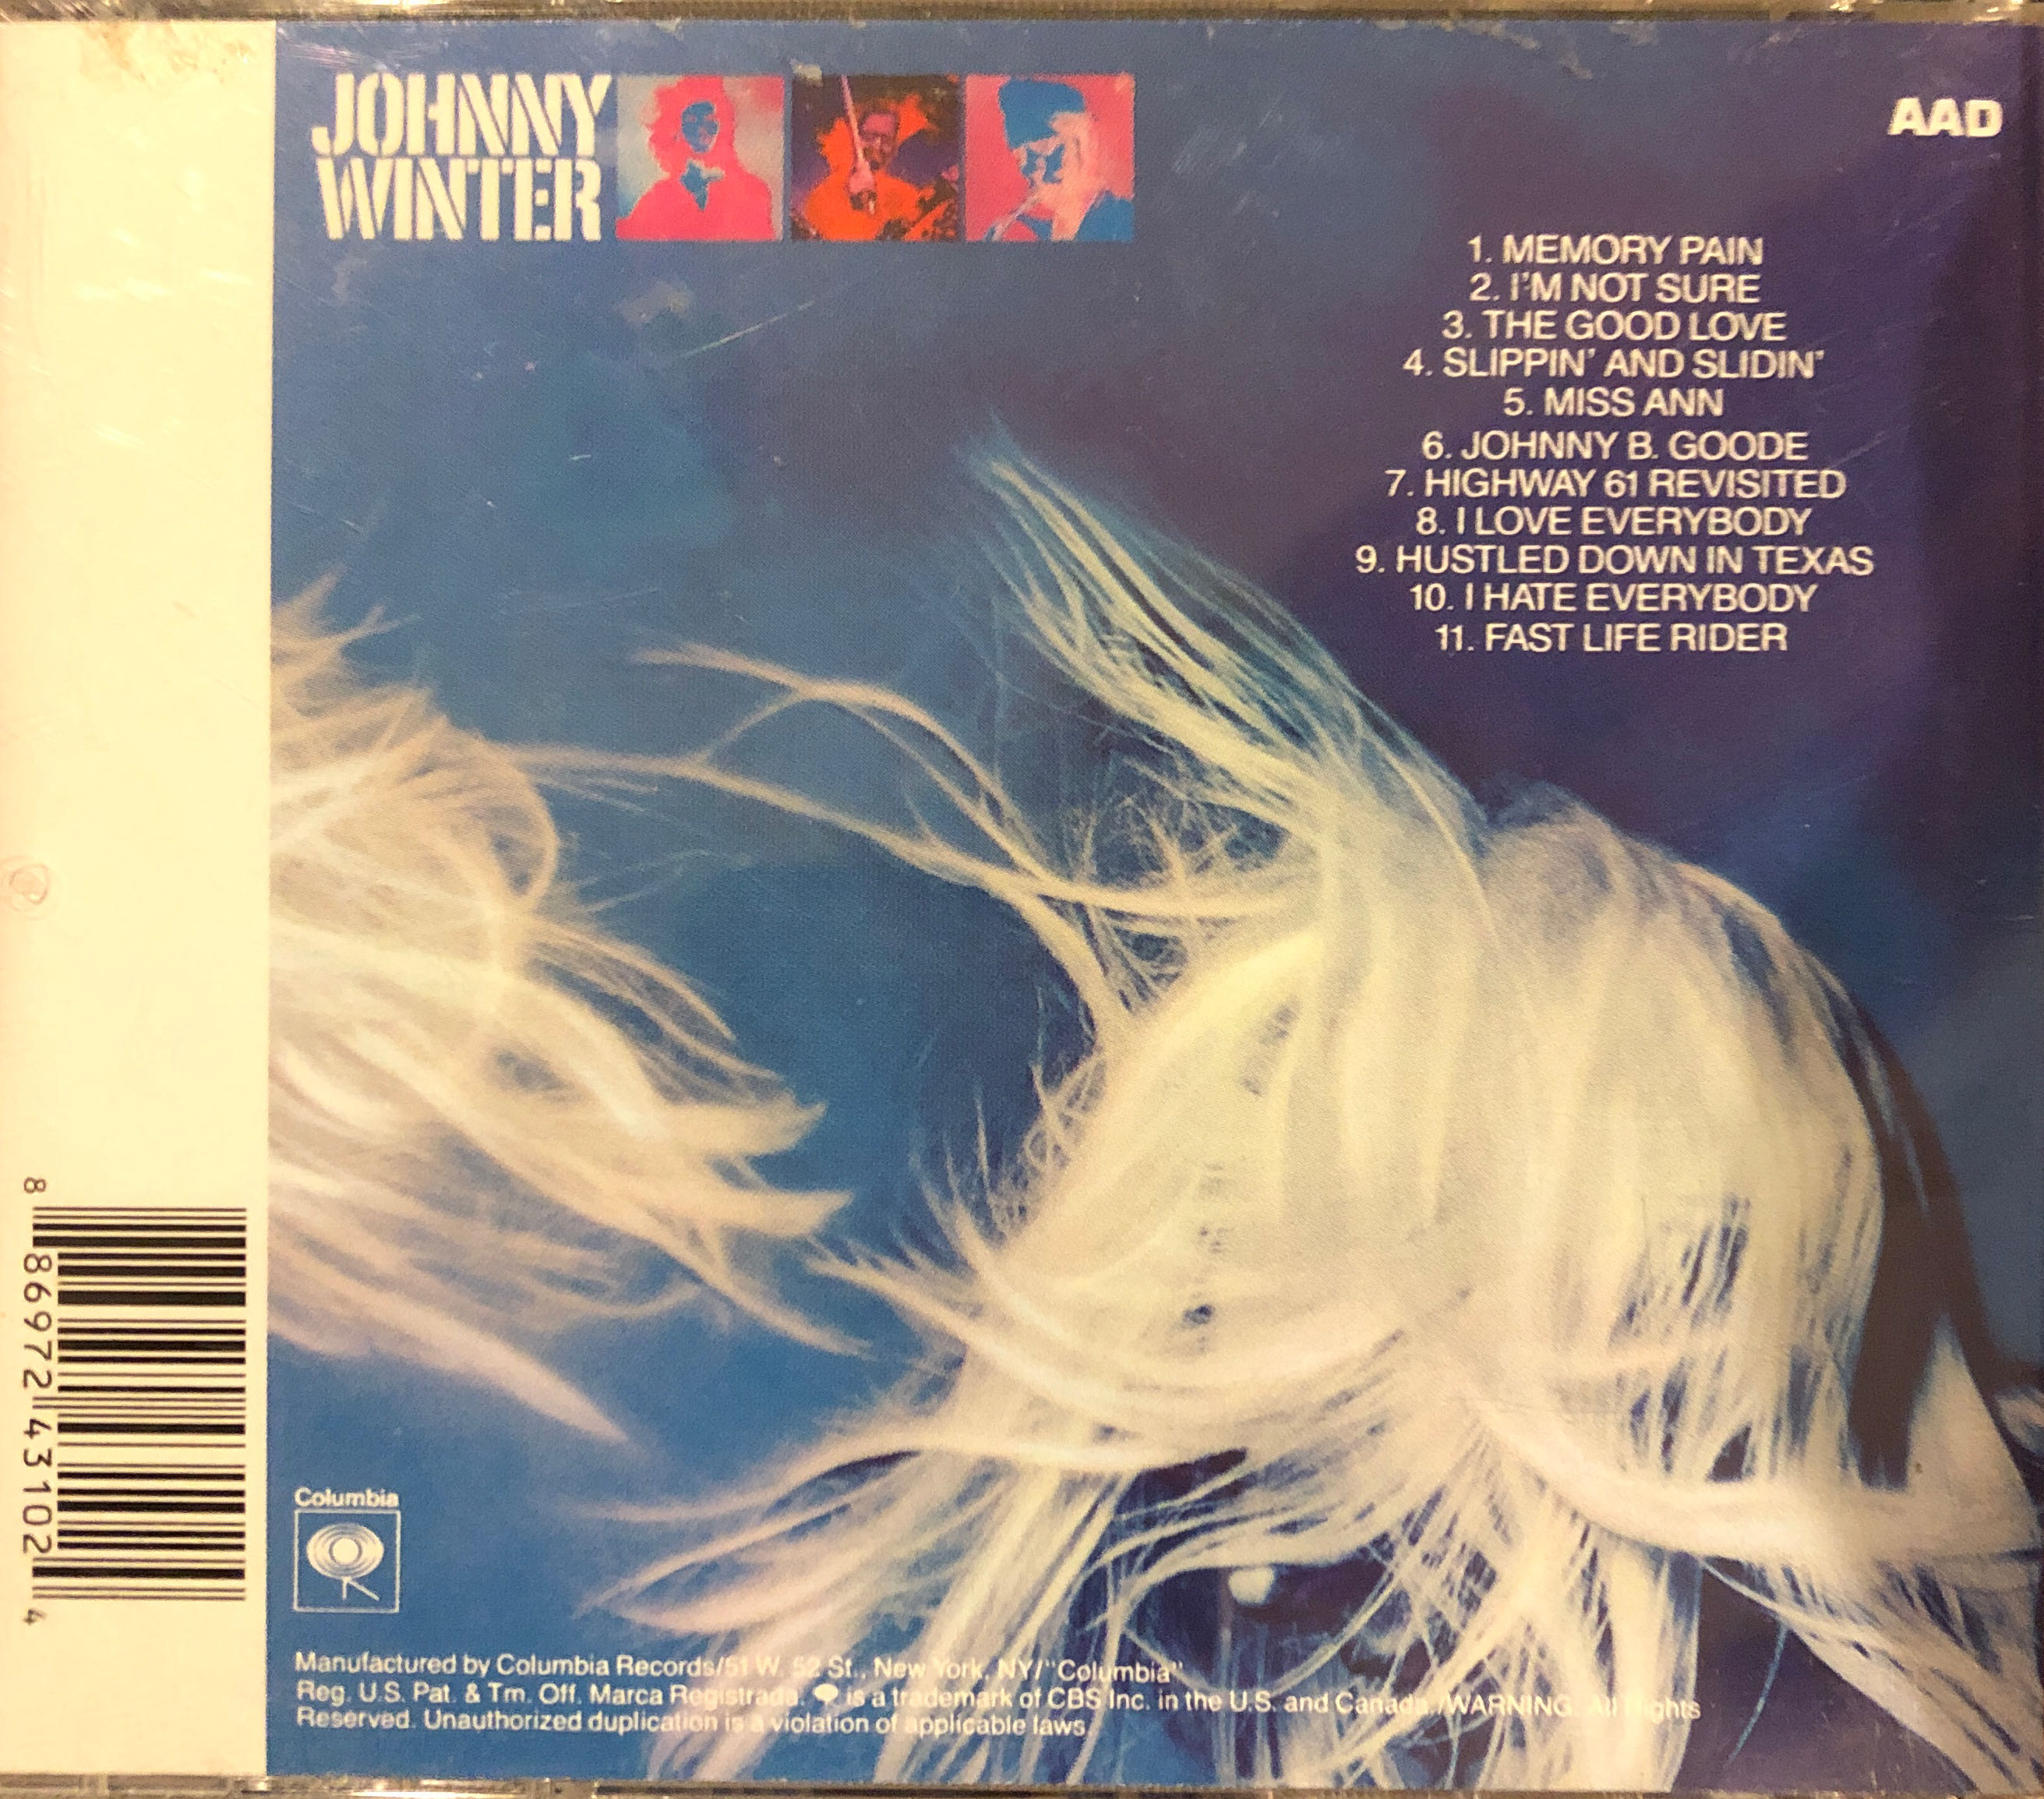 Second Winter - Johnny Winter (12”) music collectible - Main Image 2